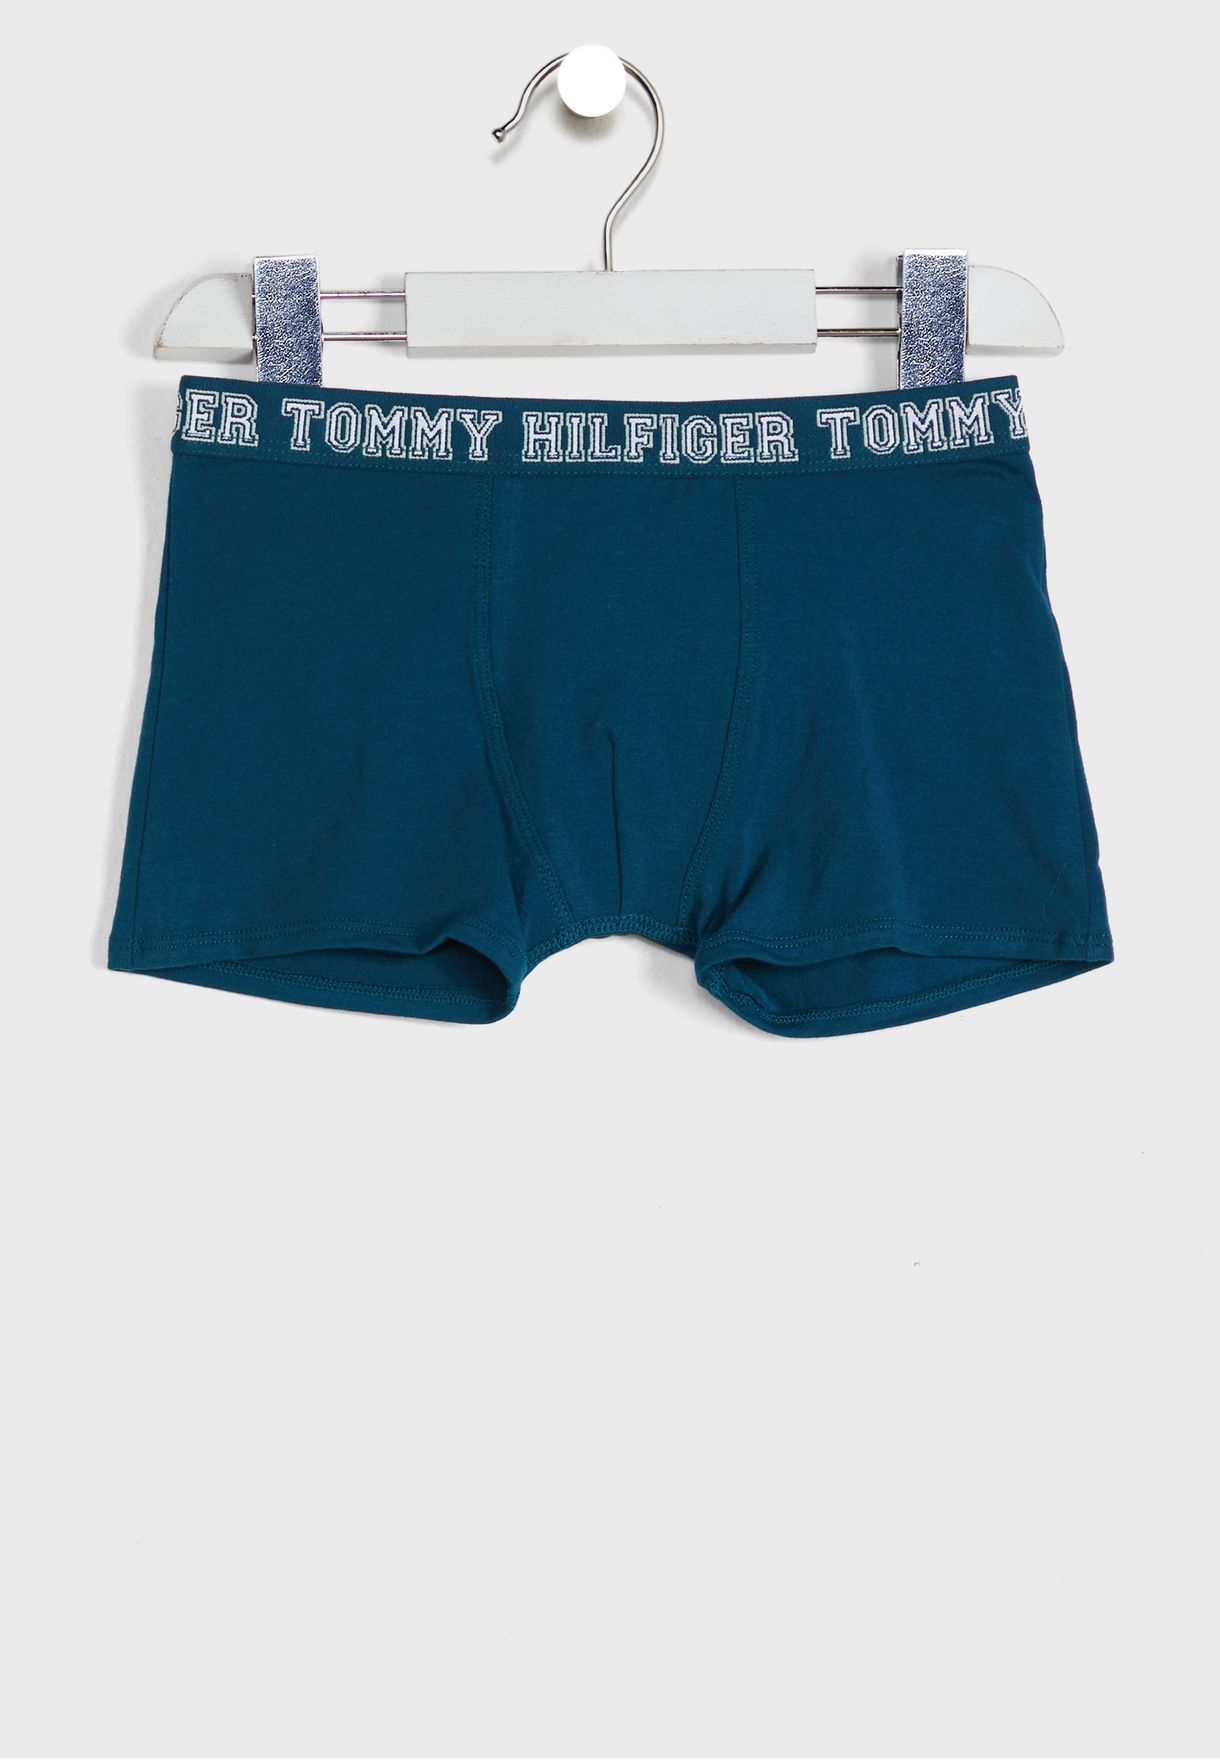 Youth 2 Pack Striped Trunks